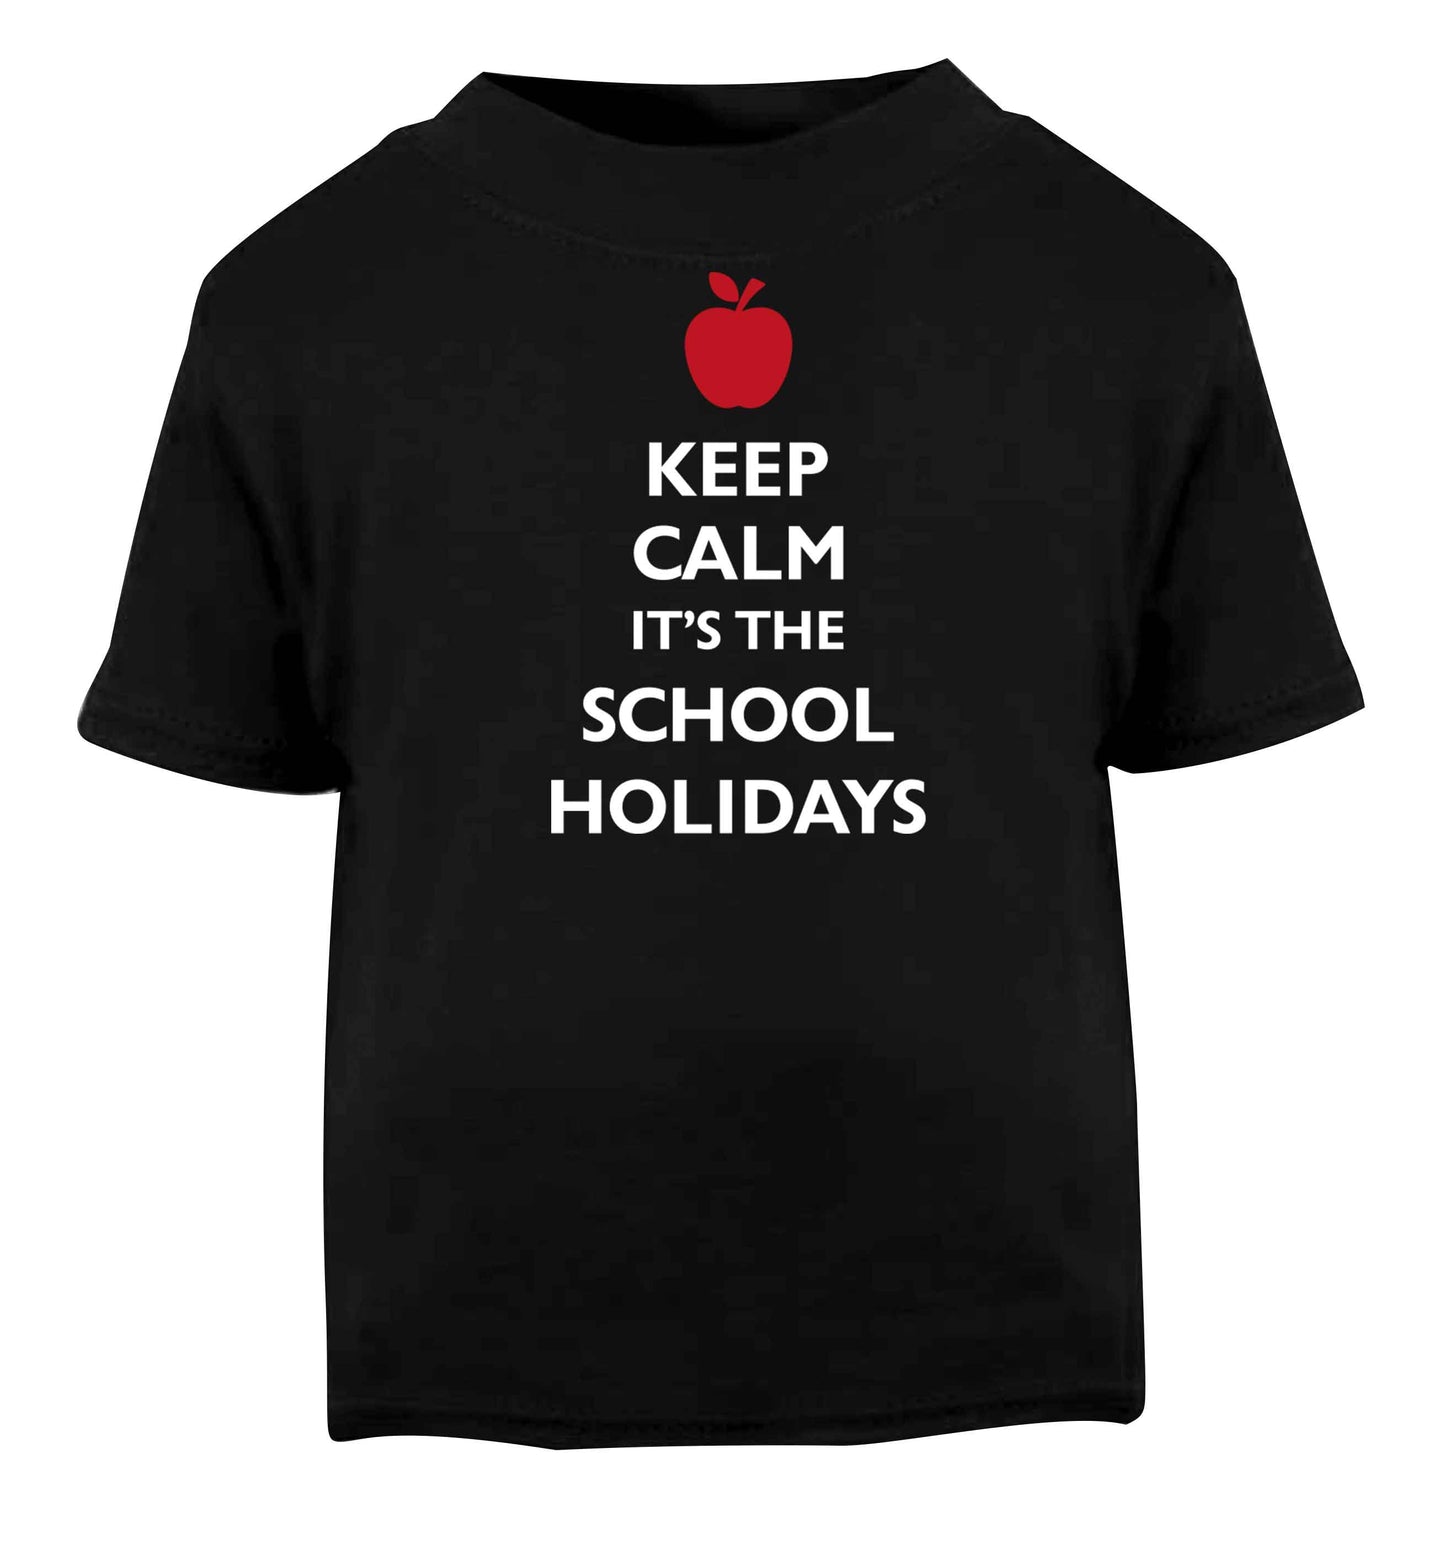 Keep calm it's the school holidays Black baby toddler Tshirt 2 years